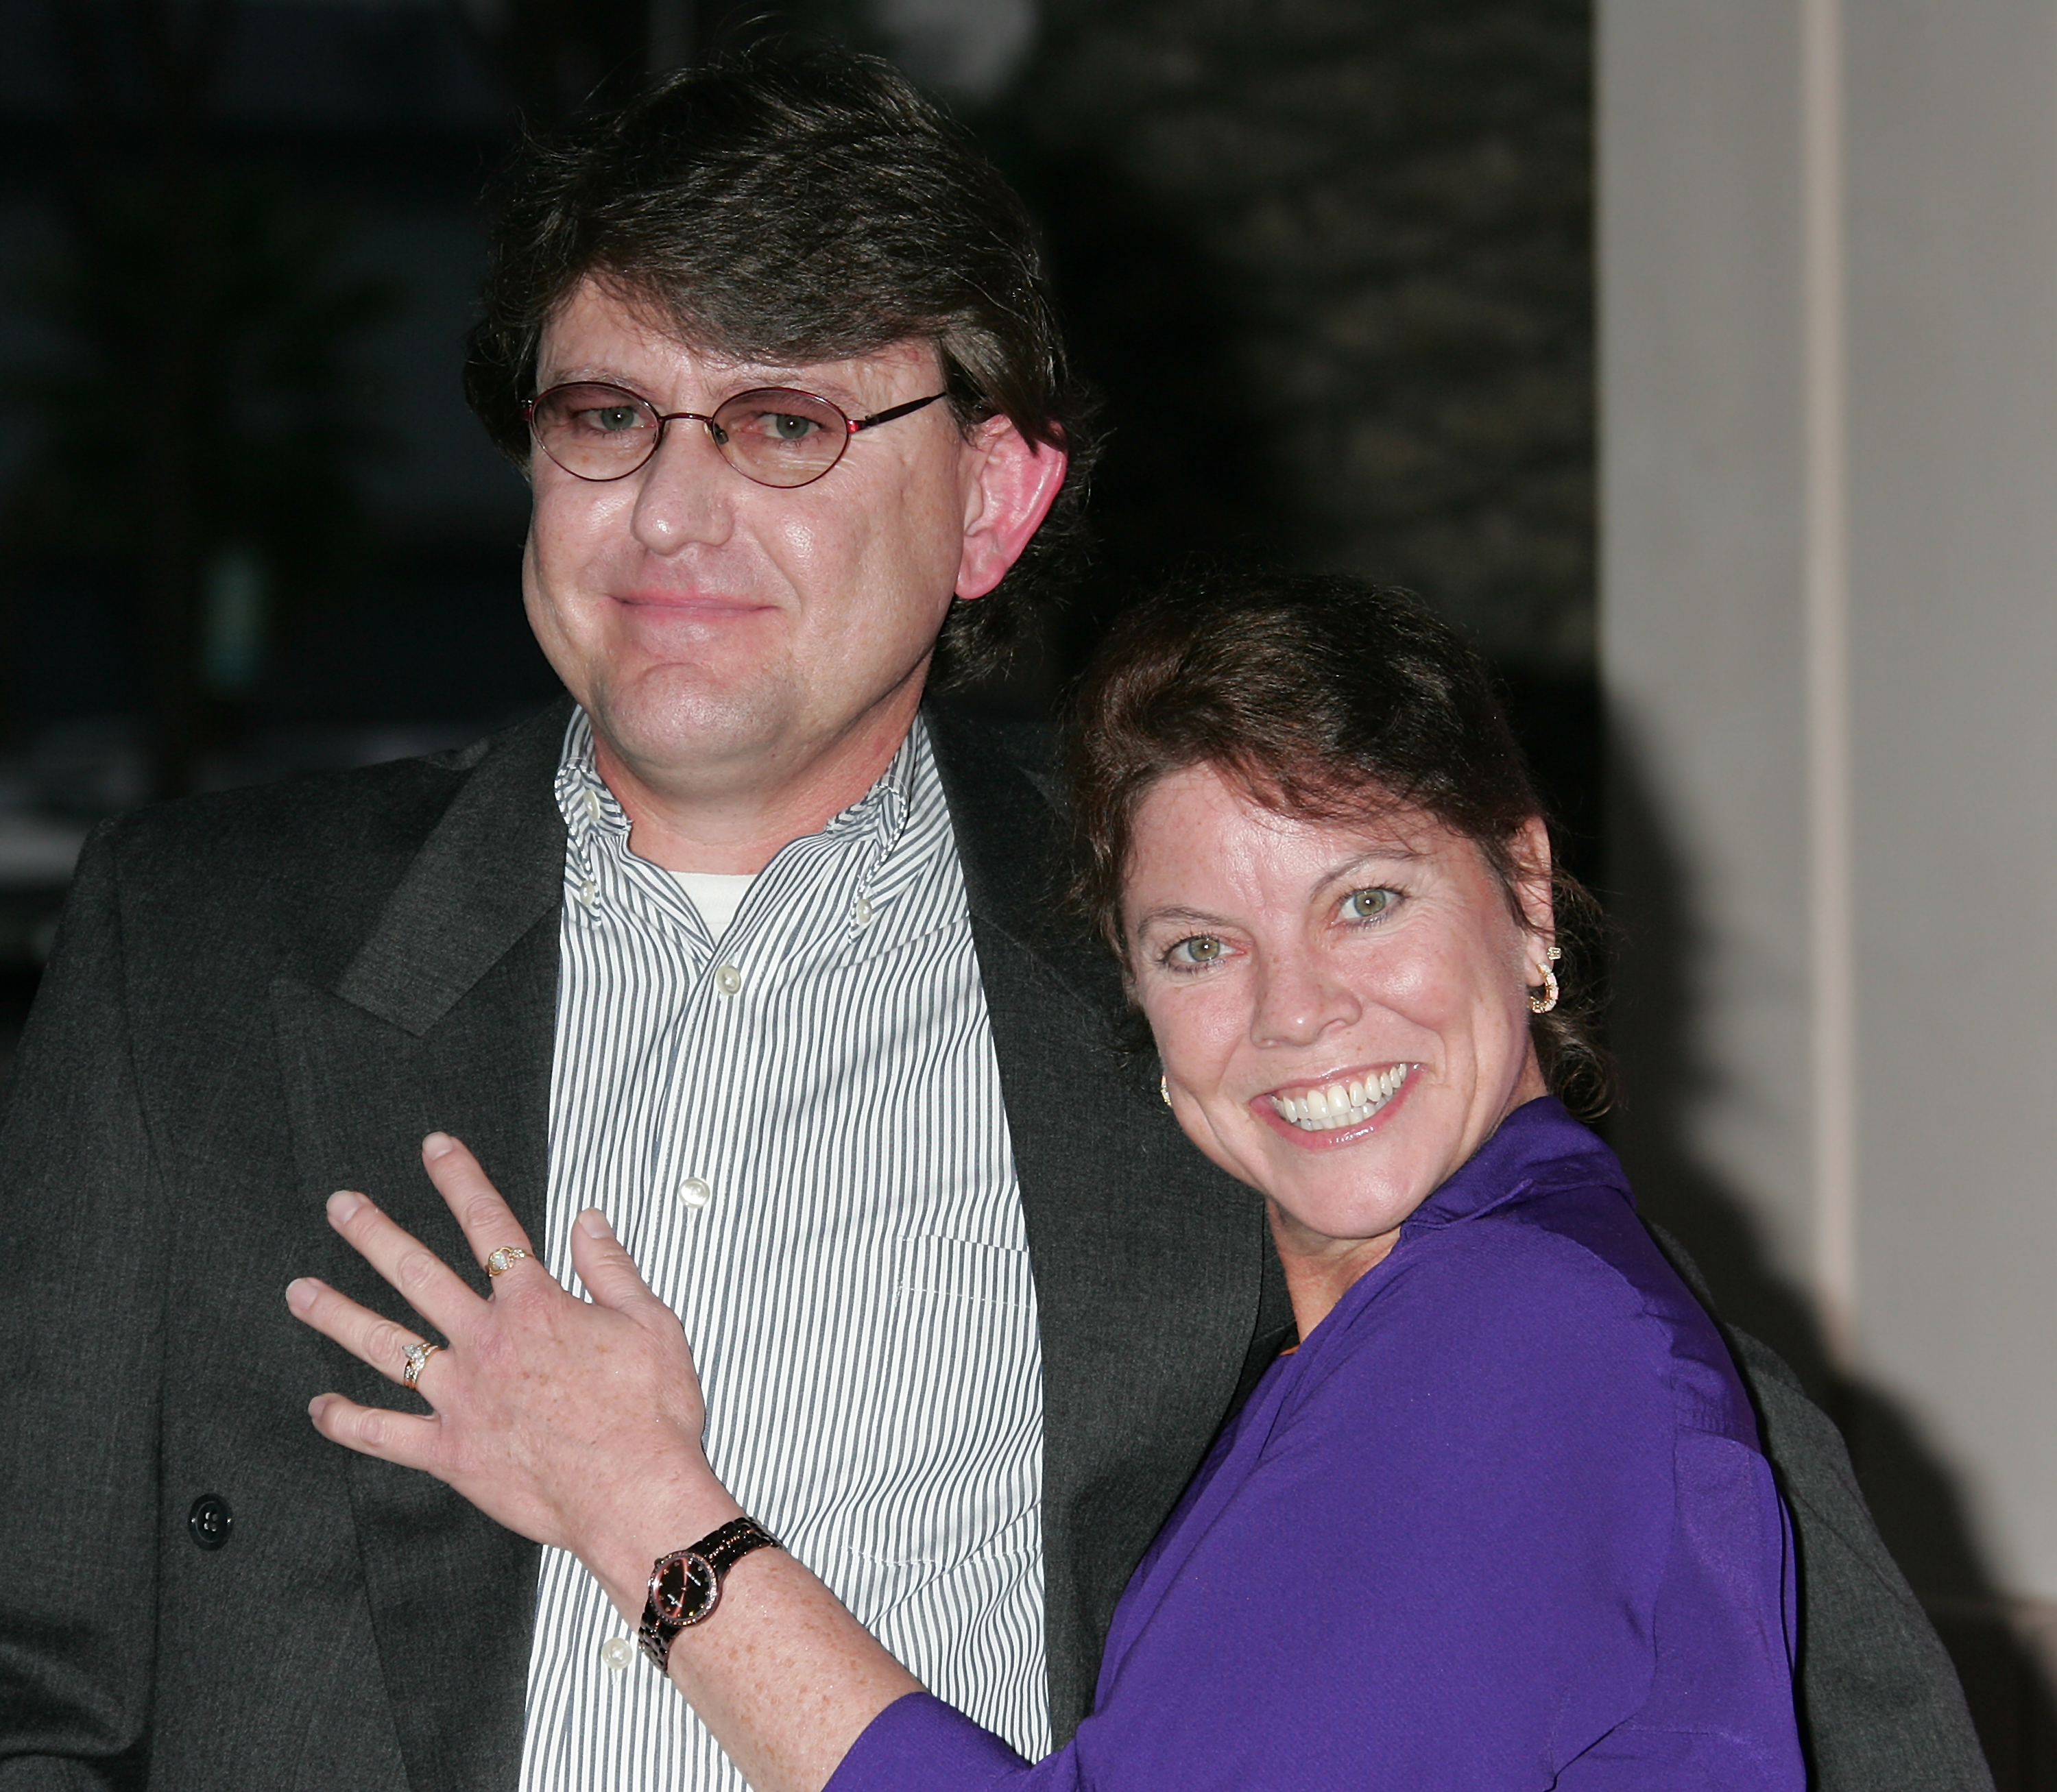 Actress Erin Moran (R) and her husband Steven Fleischmann at the Academy of Television Arts & Sciences on May 6, 2008, in North Hollywood, California. | Source: Getty Images